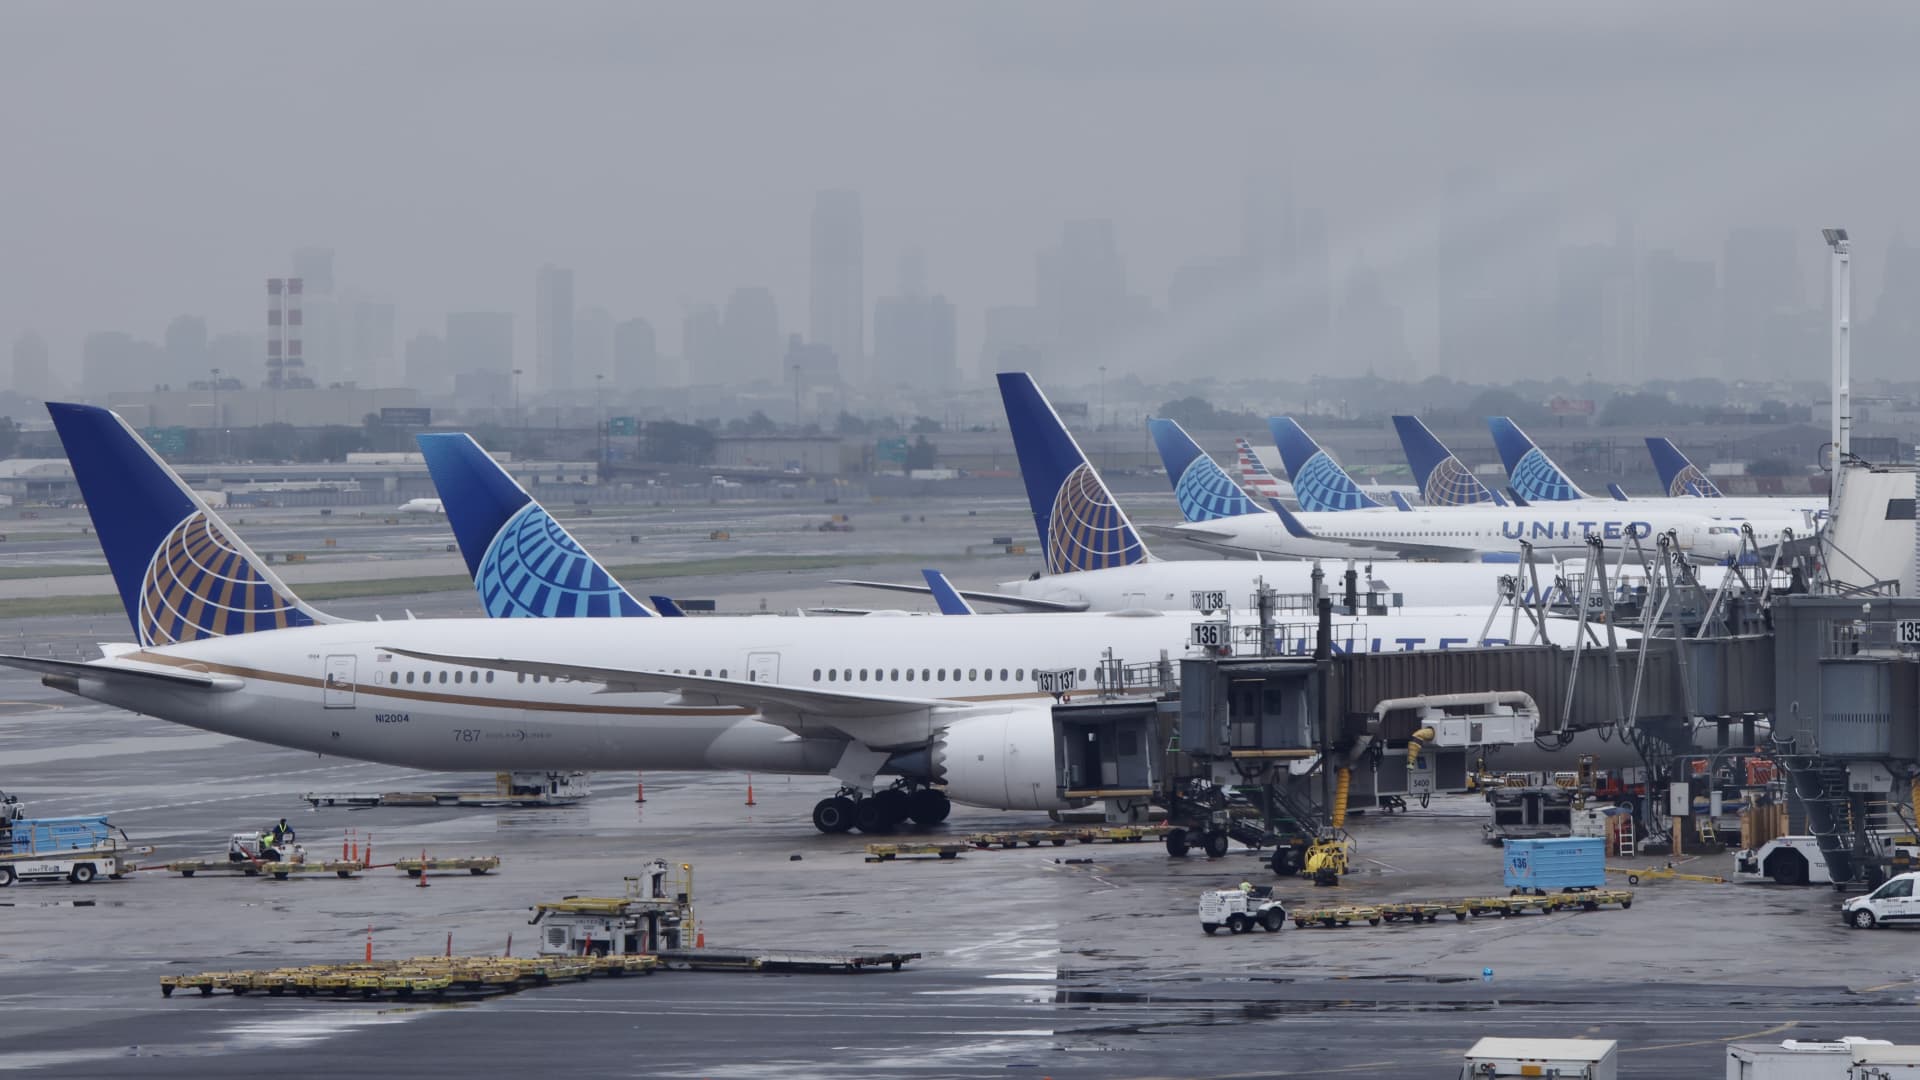 United gives 30,000 frequent flyer miles to travelers hit by flight delays, CEO says schedule cuts needed